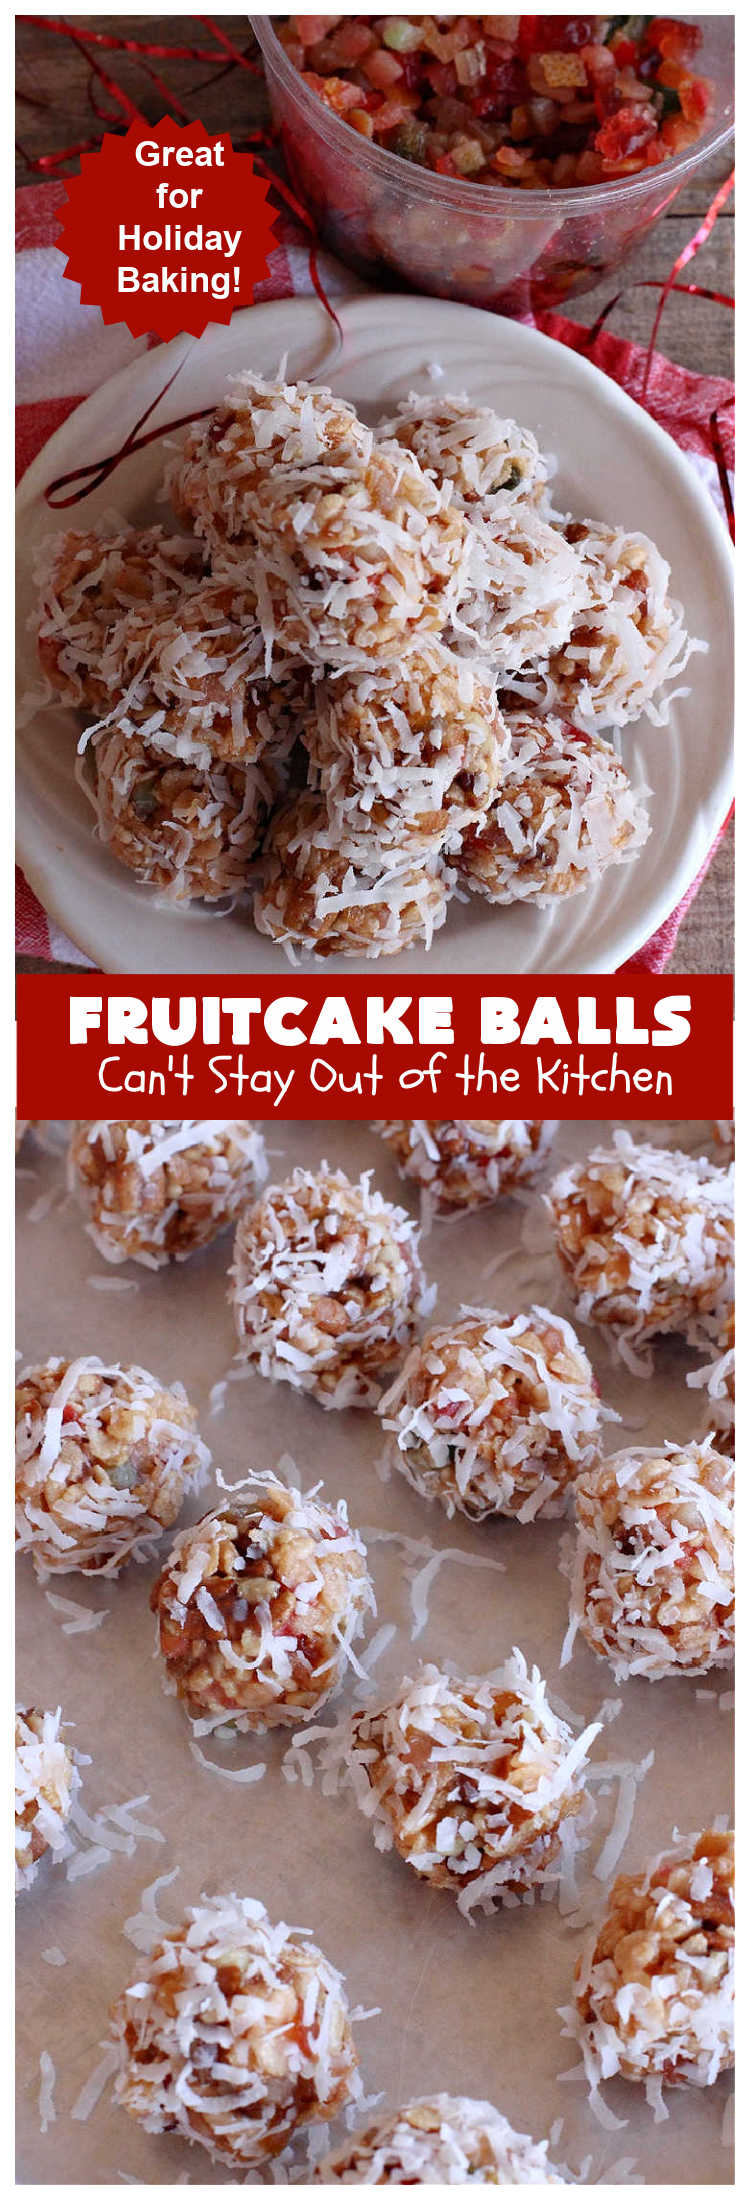 Fruitcake Balls | Can't Stay Out of the Kitchen | these lovely #cookies include #fruitcake mix, #pecans #RiceKrispies & #coconut. They're fantastic for #holiday #baking, #tailgating parties & a #ChristmasCookieExchange. This is a mouthwatering & irresistible #GlutenFree #dessert #ChristmasDessert #HolidayDessert #FruitcakeDessert #ParadiseCandiedFruit #ParadiseFruitCompany #FruitcakeBalls